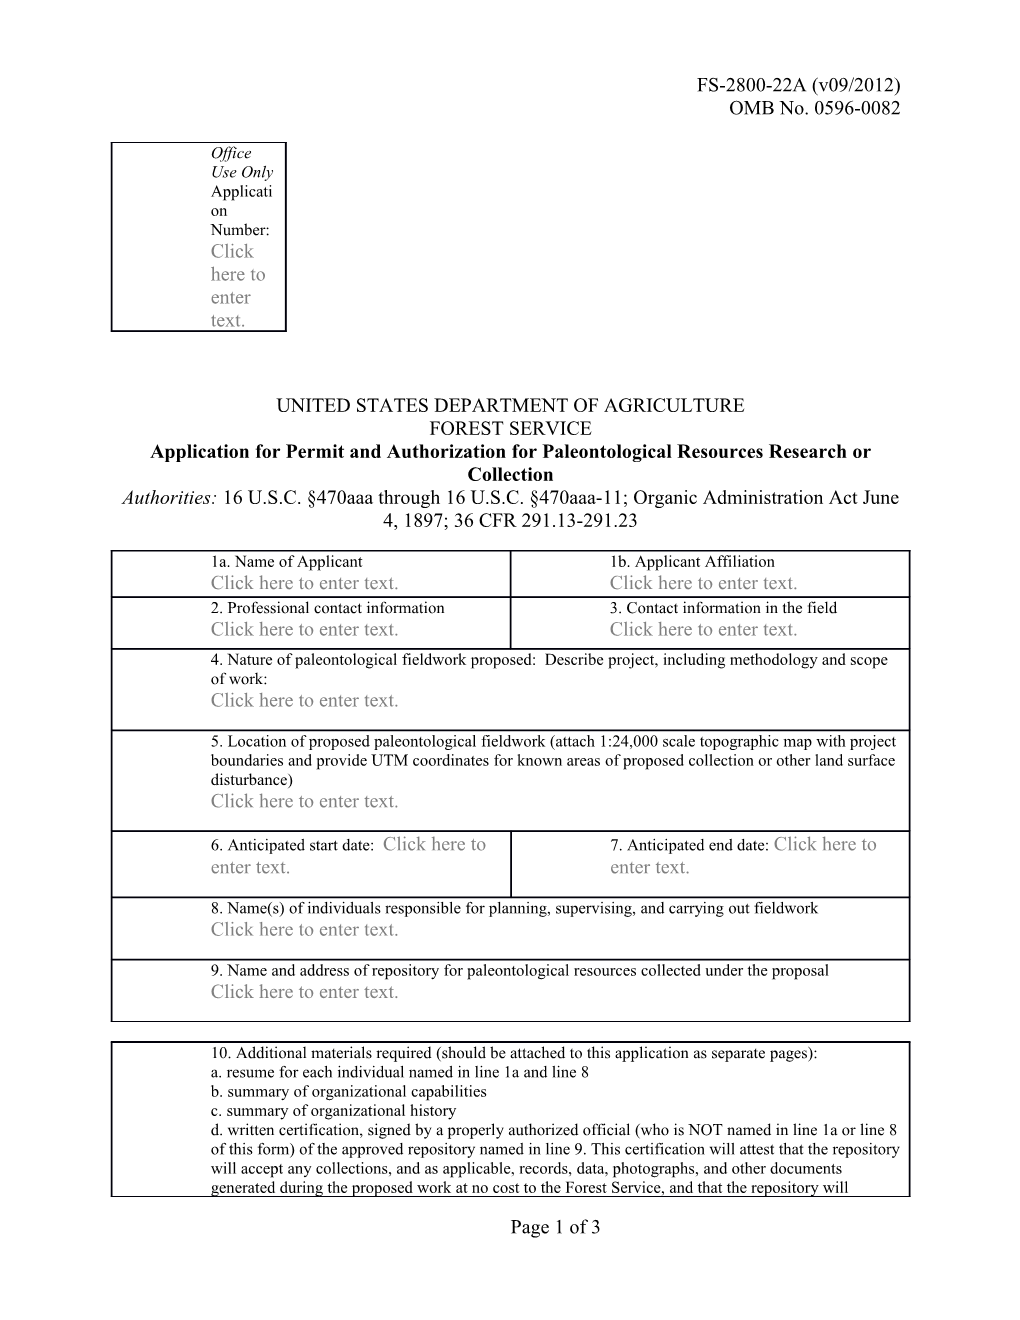 Application for Permit and Authorization for Paleontological Resources Research Or Collection